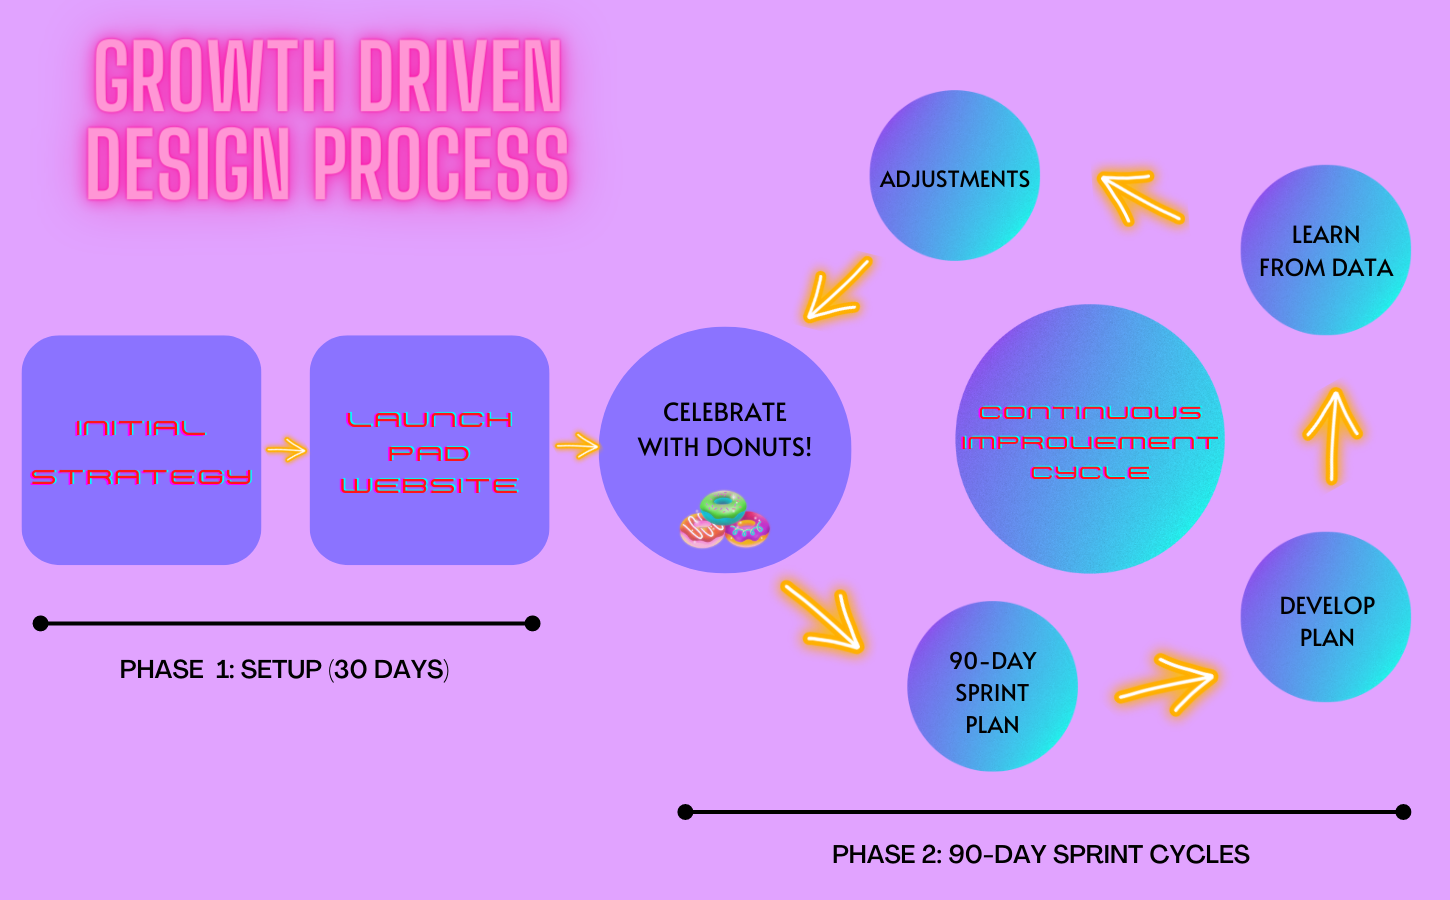 The growth driven design process